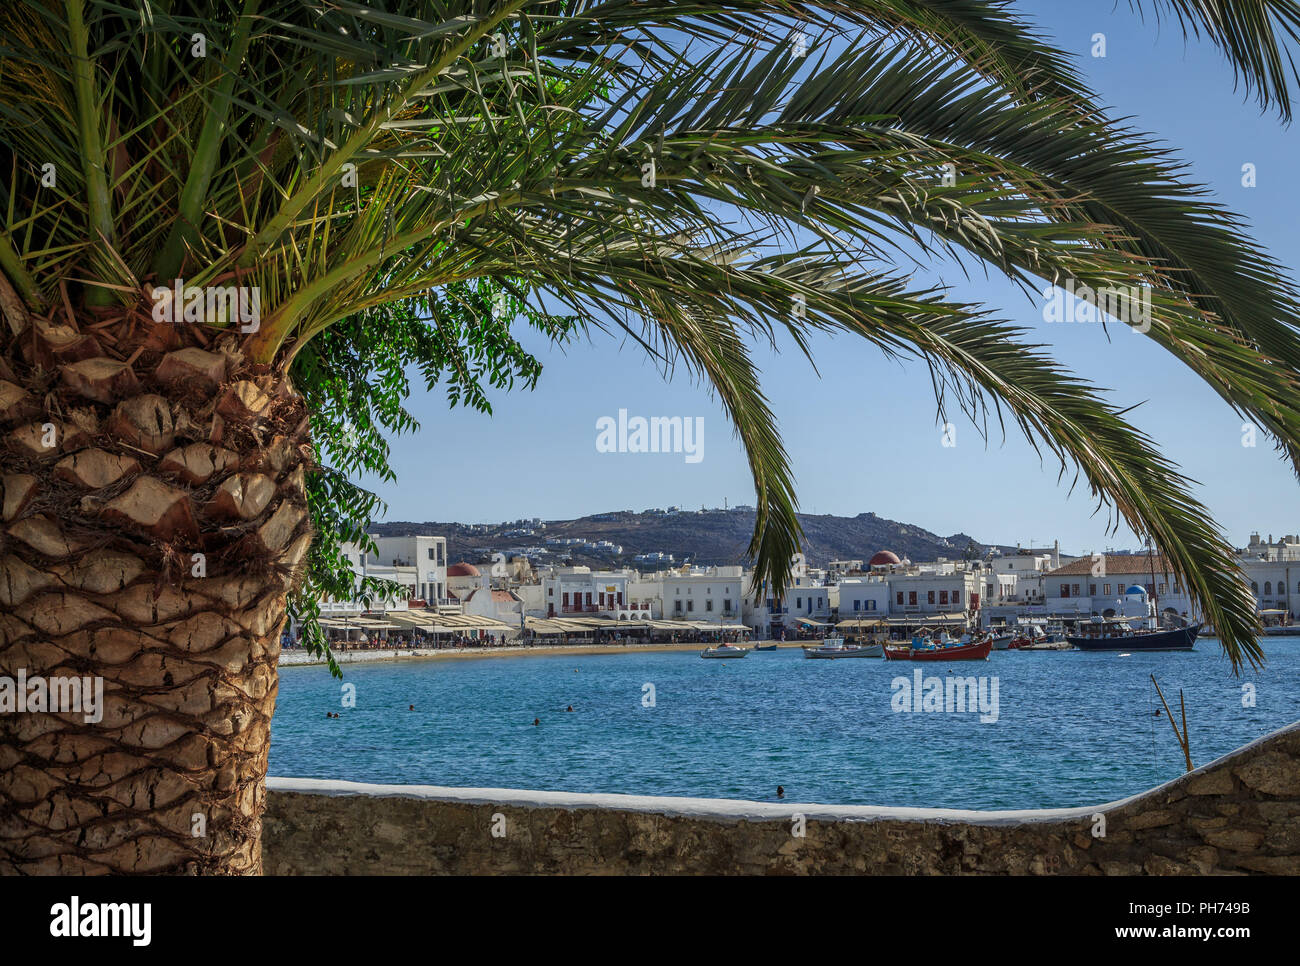 Bay of Mykonos in a natural palm tree frame Stock Photo